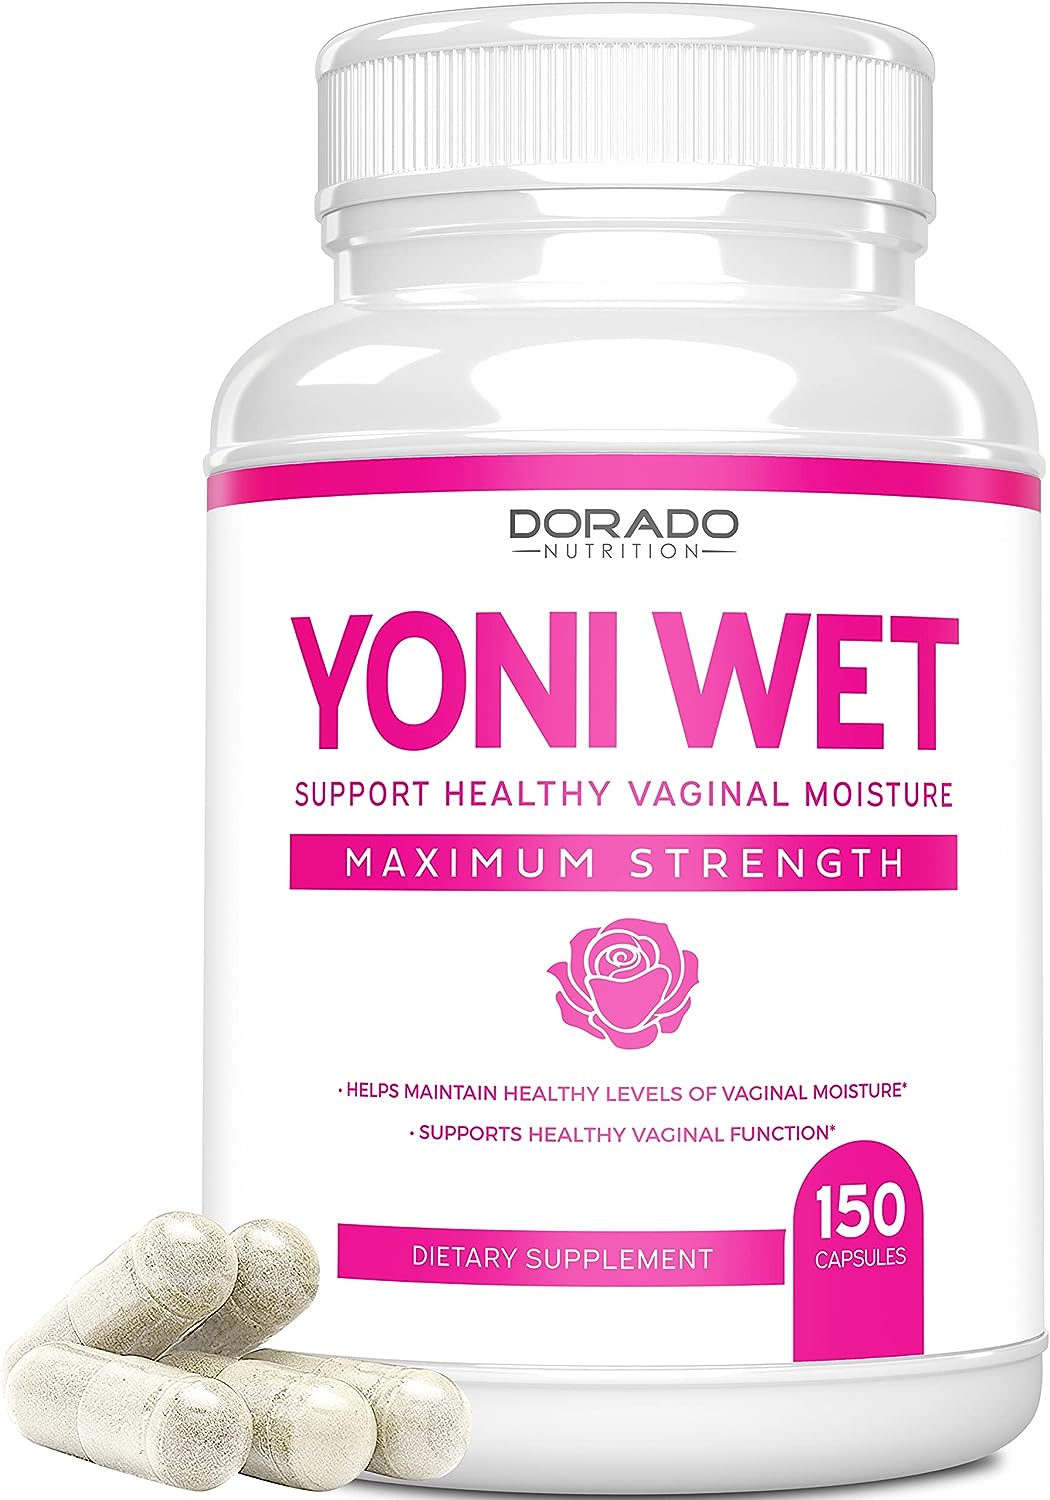 Yoni Wet Vaginal Health Support Supplement Review